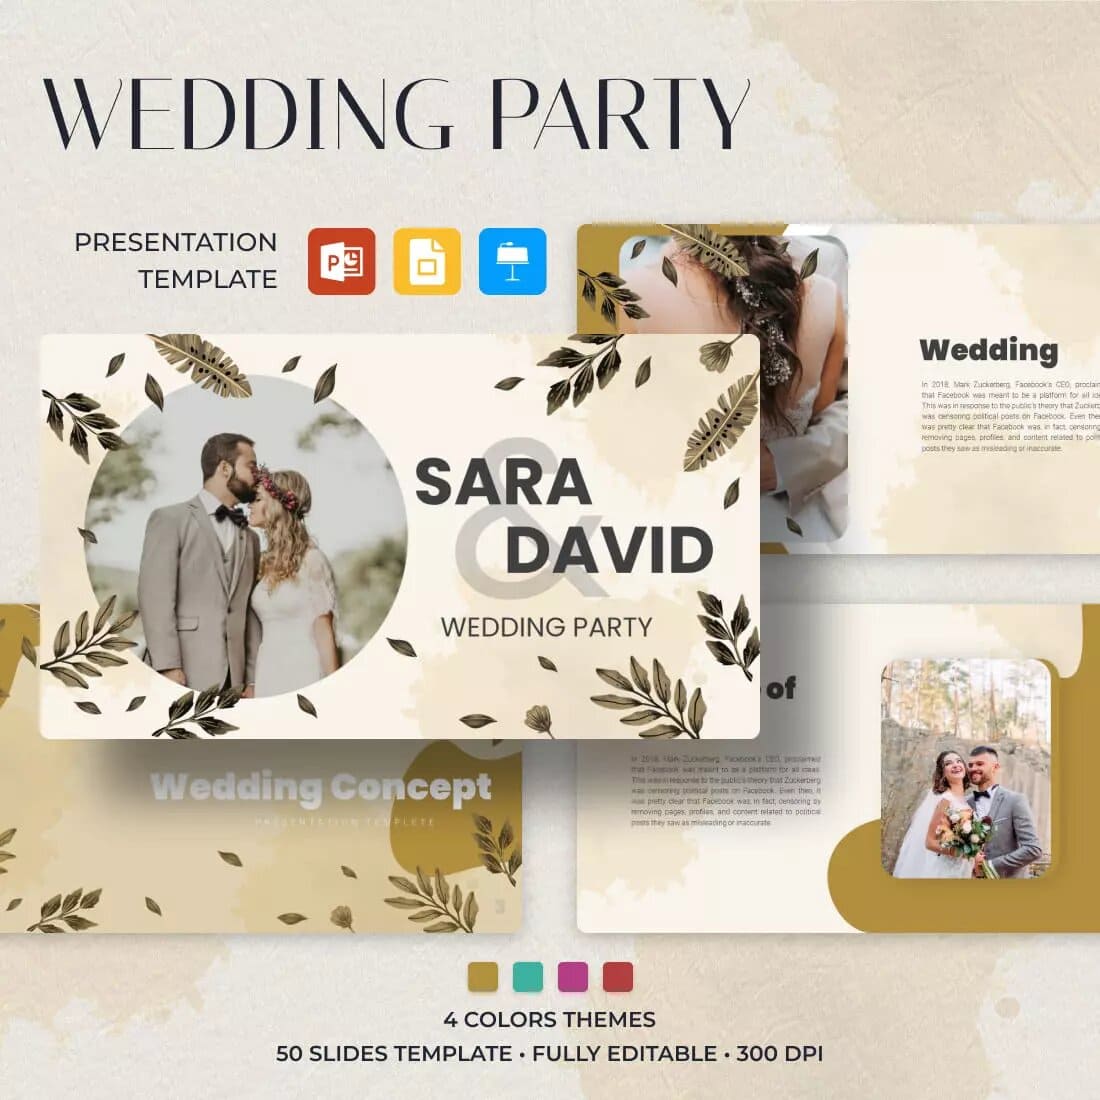 Wedding Party Presentation Template Preview 2.